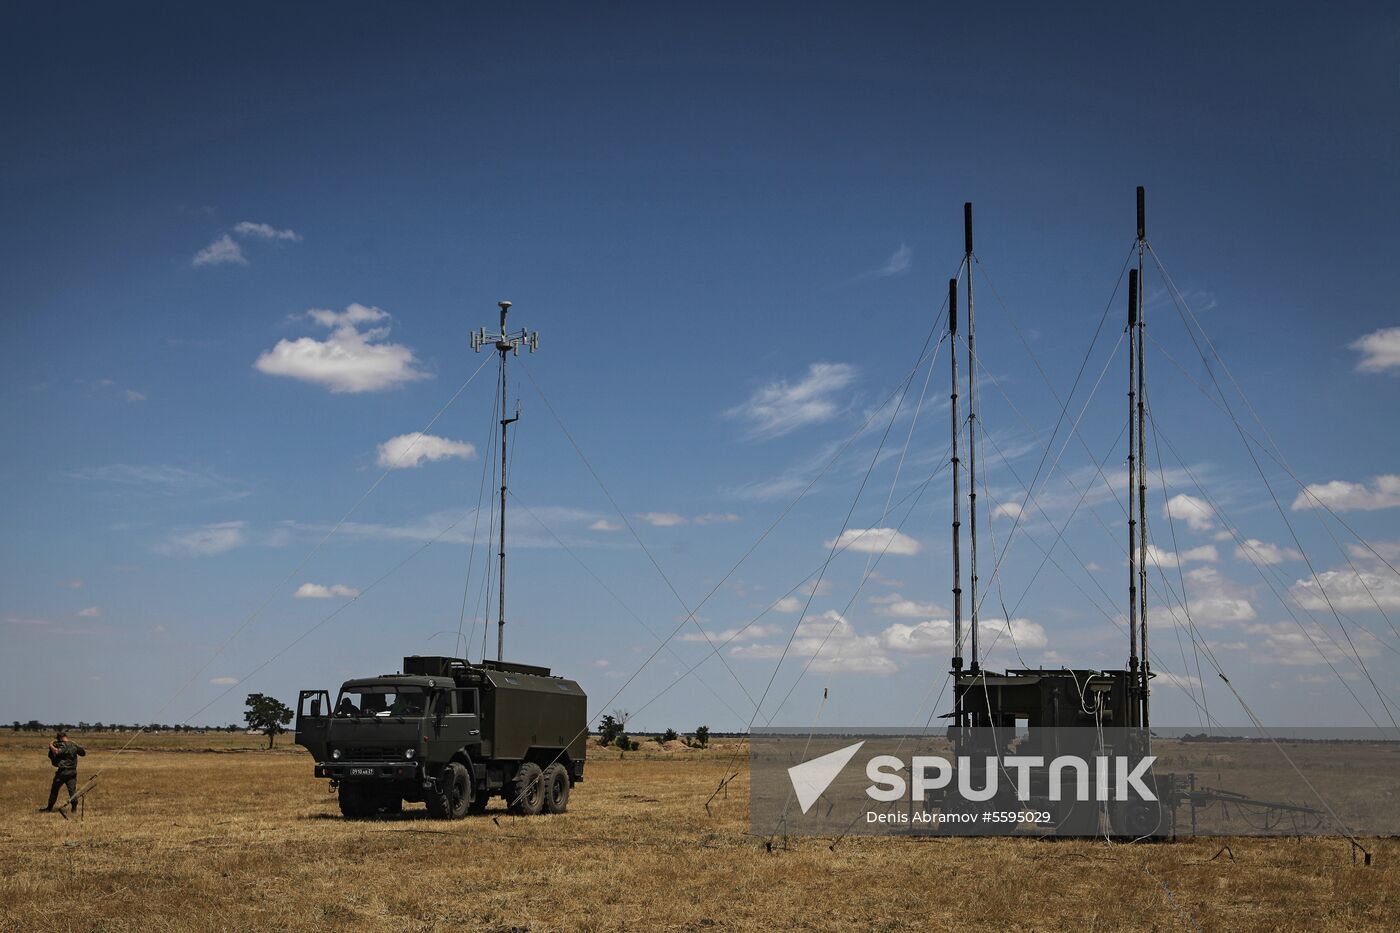 Stage of competition for field training among units of electronic warfare